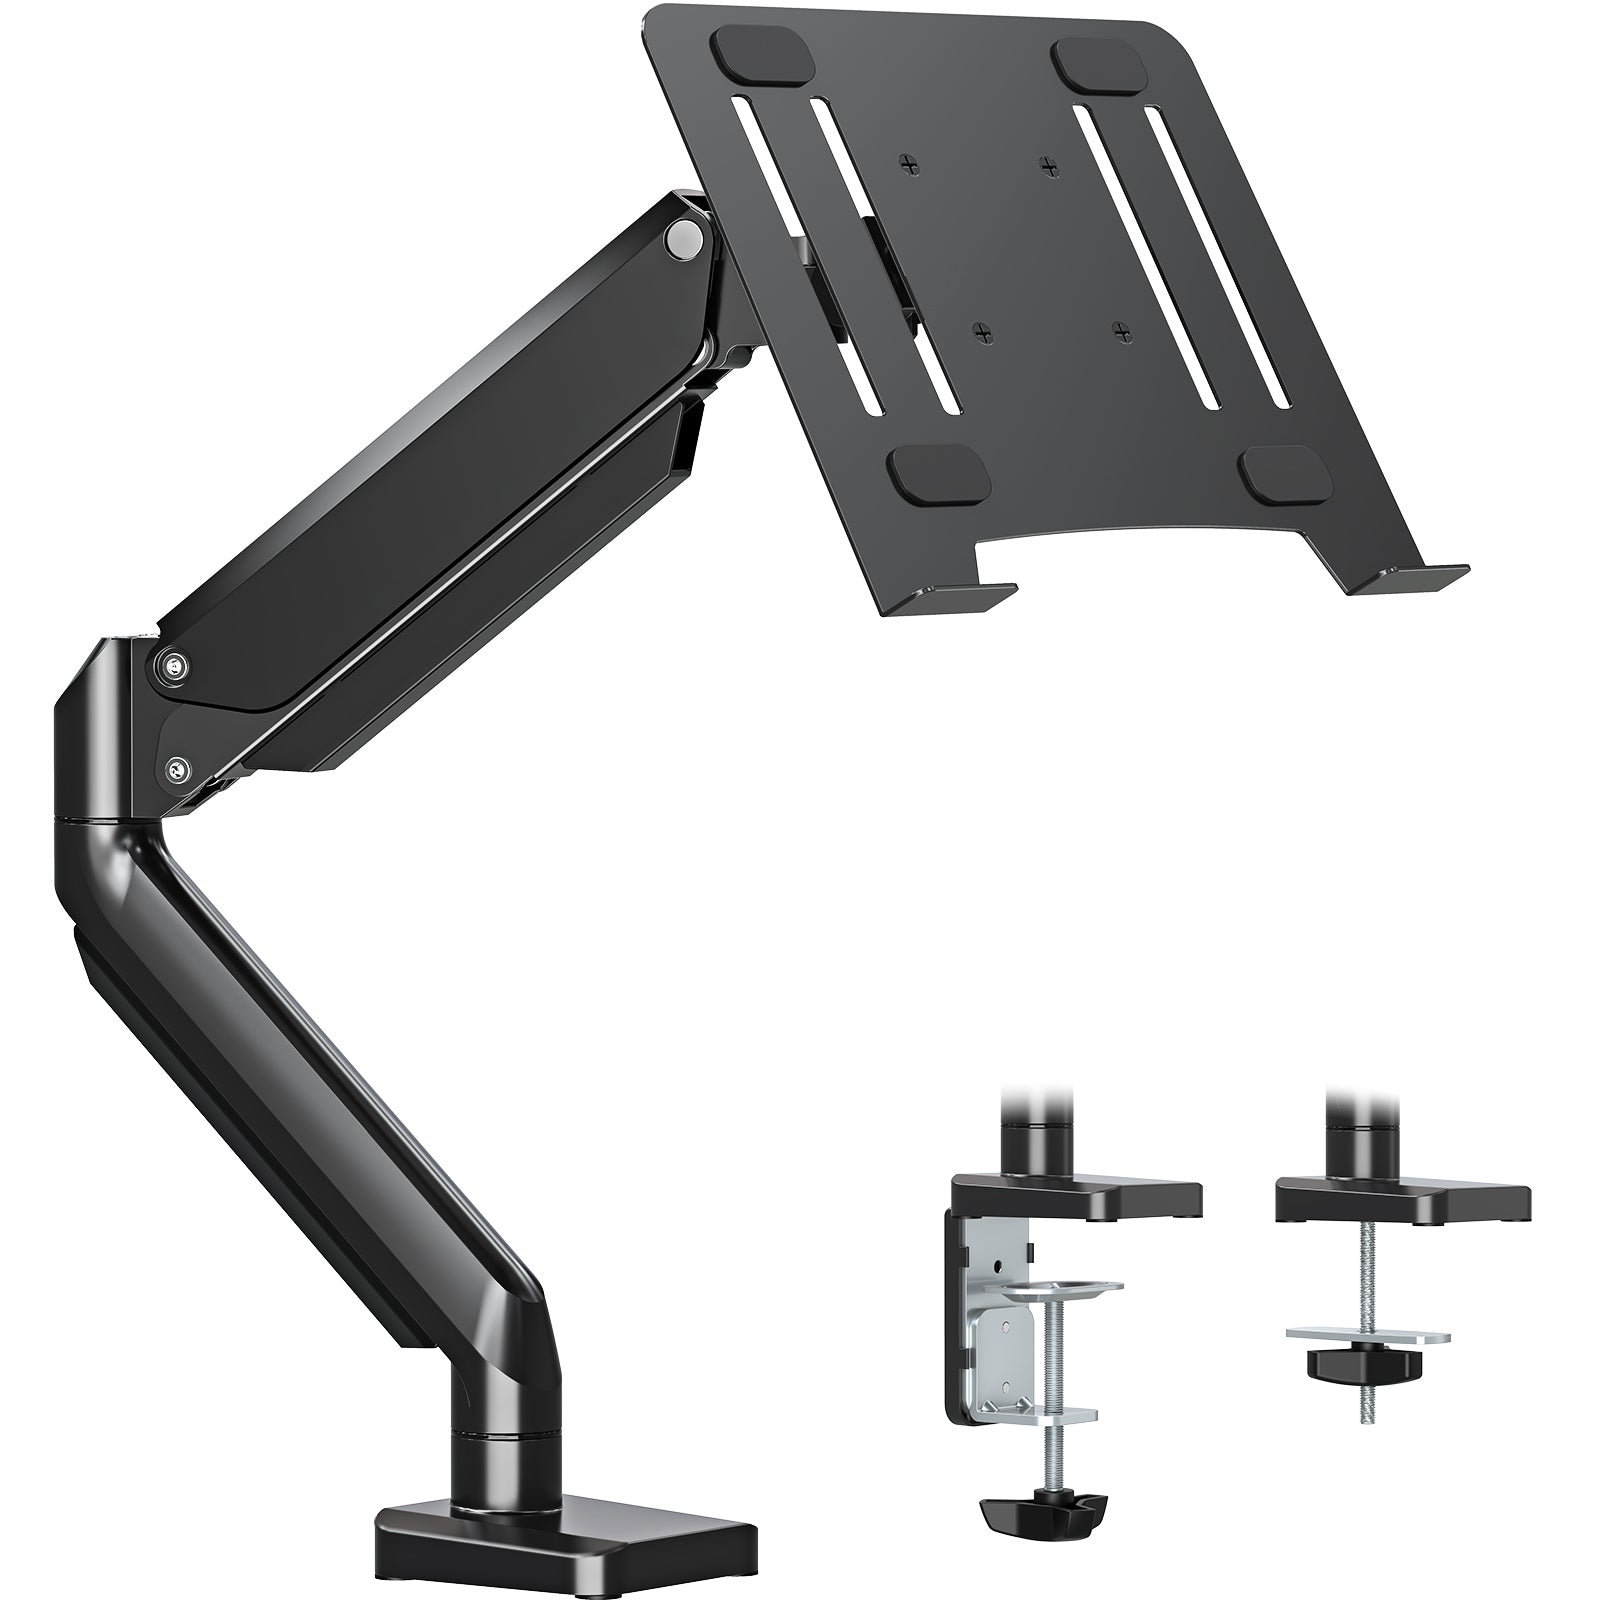 MOUNTUP Laptop Arm Mount for Desk Holds 3.3-17.6lbs MU4007